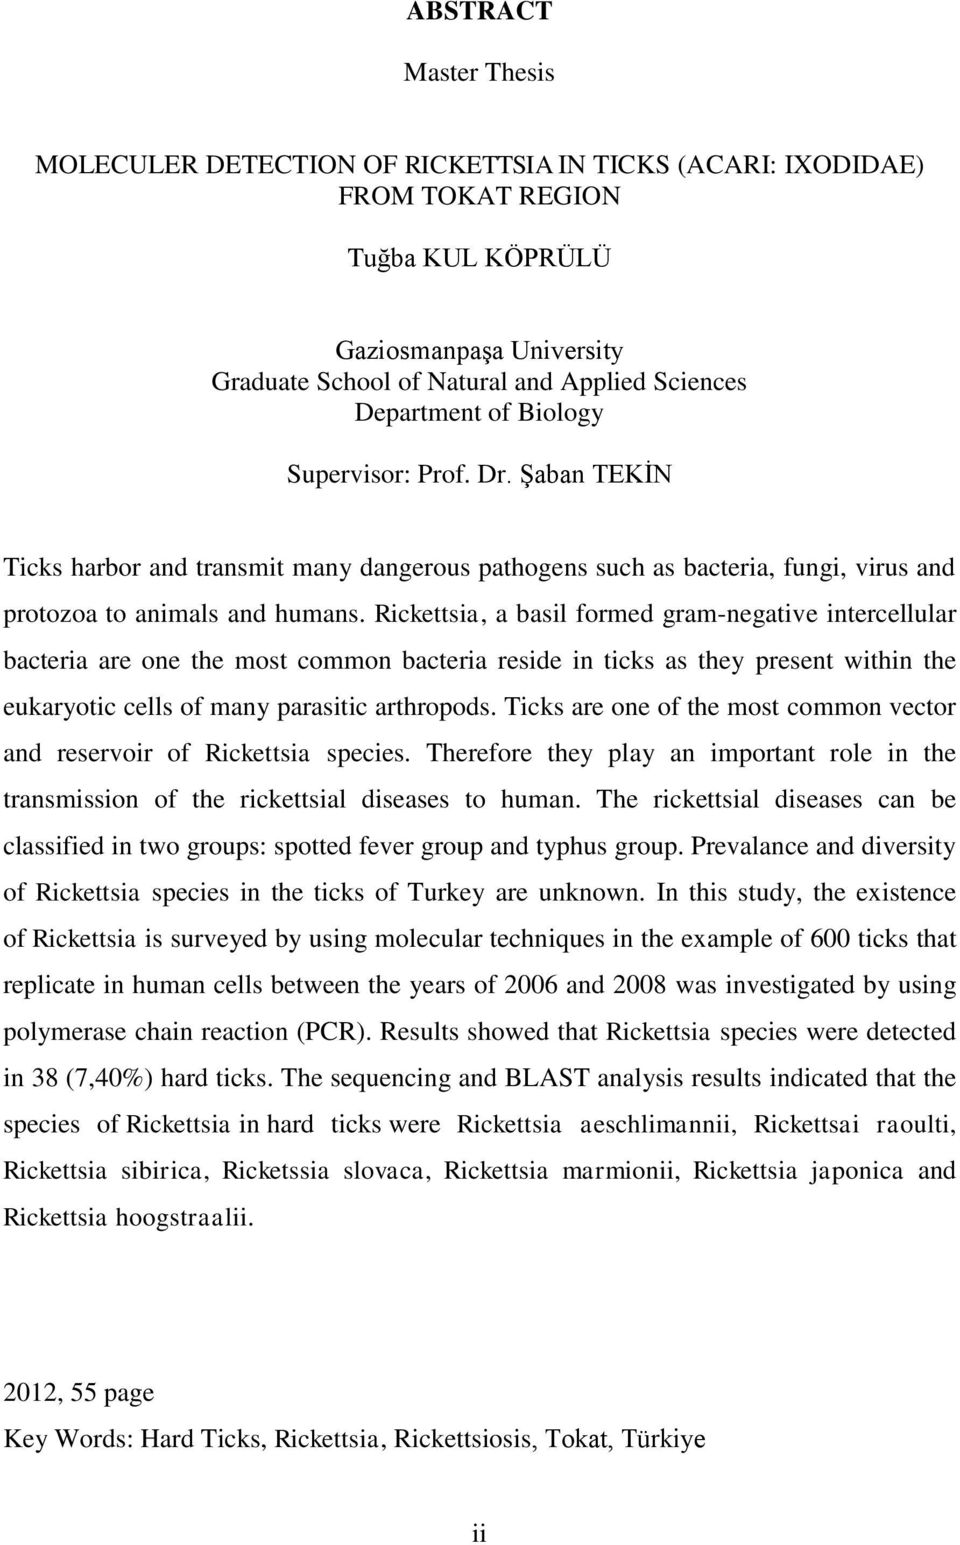 Rickettsia, a basil formed gram-negative intercellular bacteria are one the most common bacteria reside in ticks as they present within the eukaryotic cells of many parasitic arthropods.